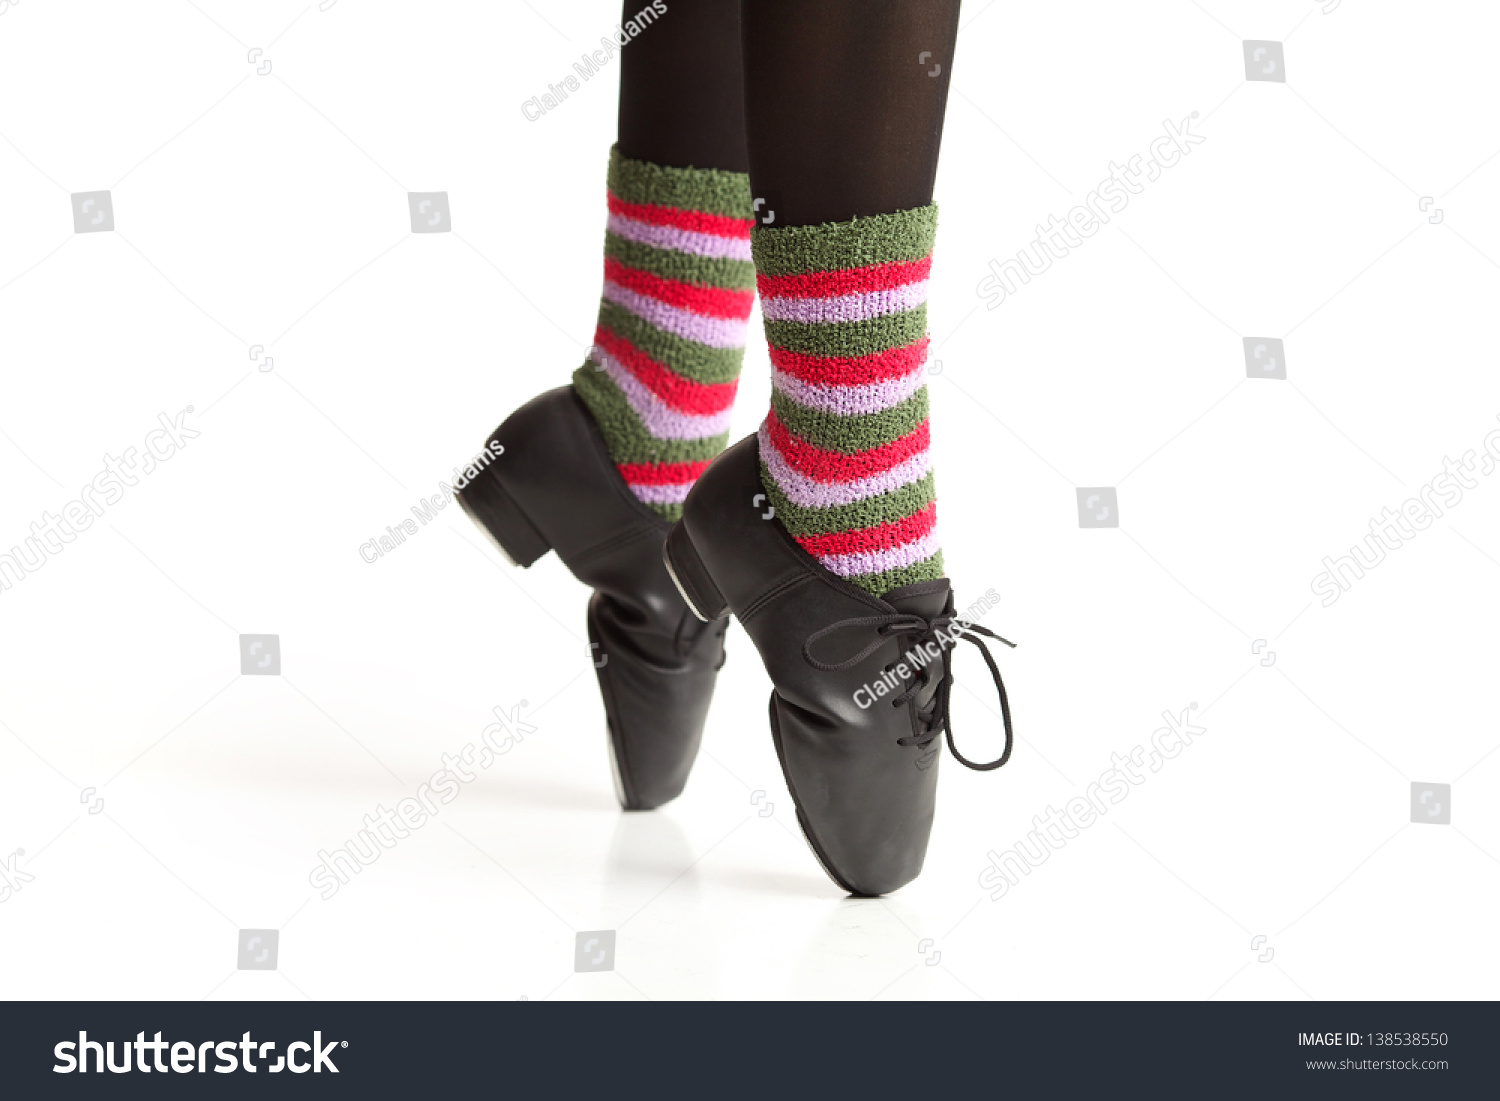 socks for tap shoes